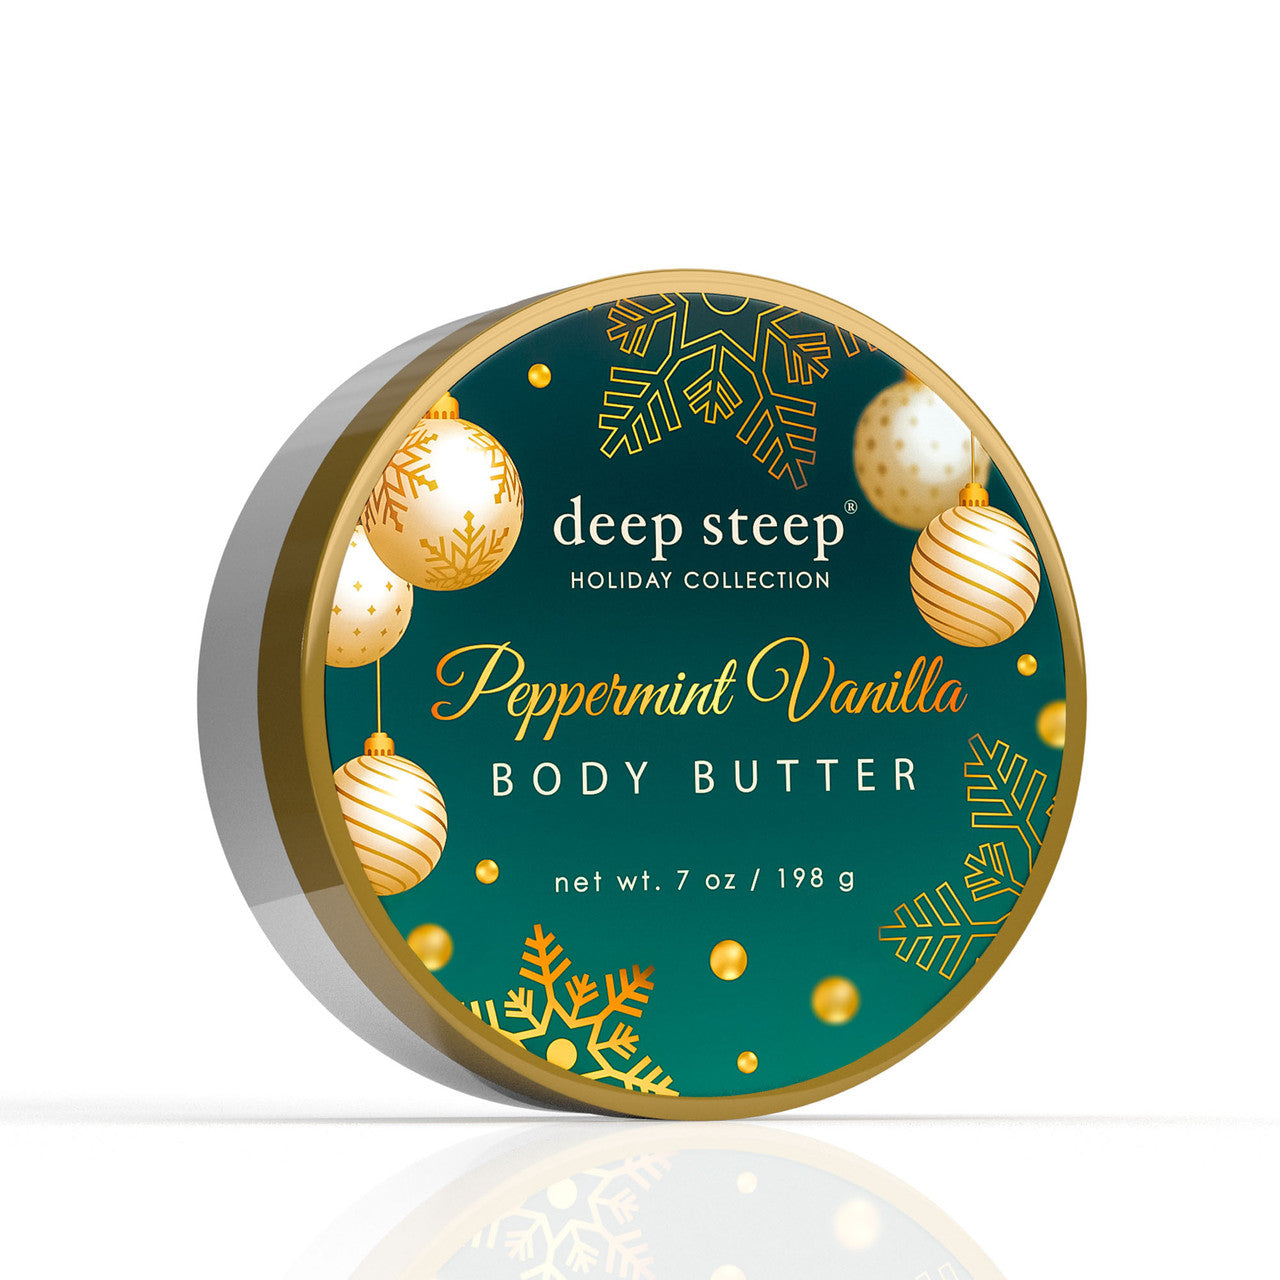 Holiday 7oz Body Butter -Peppermint Vanilla - Front